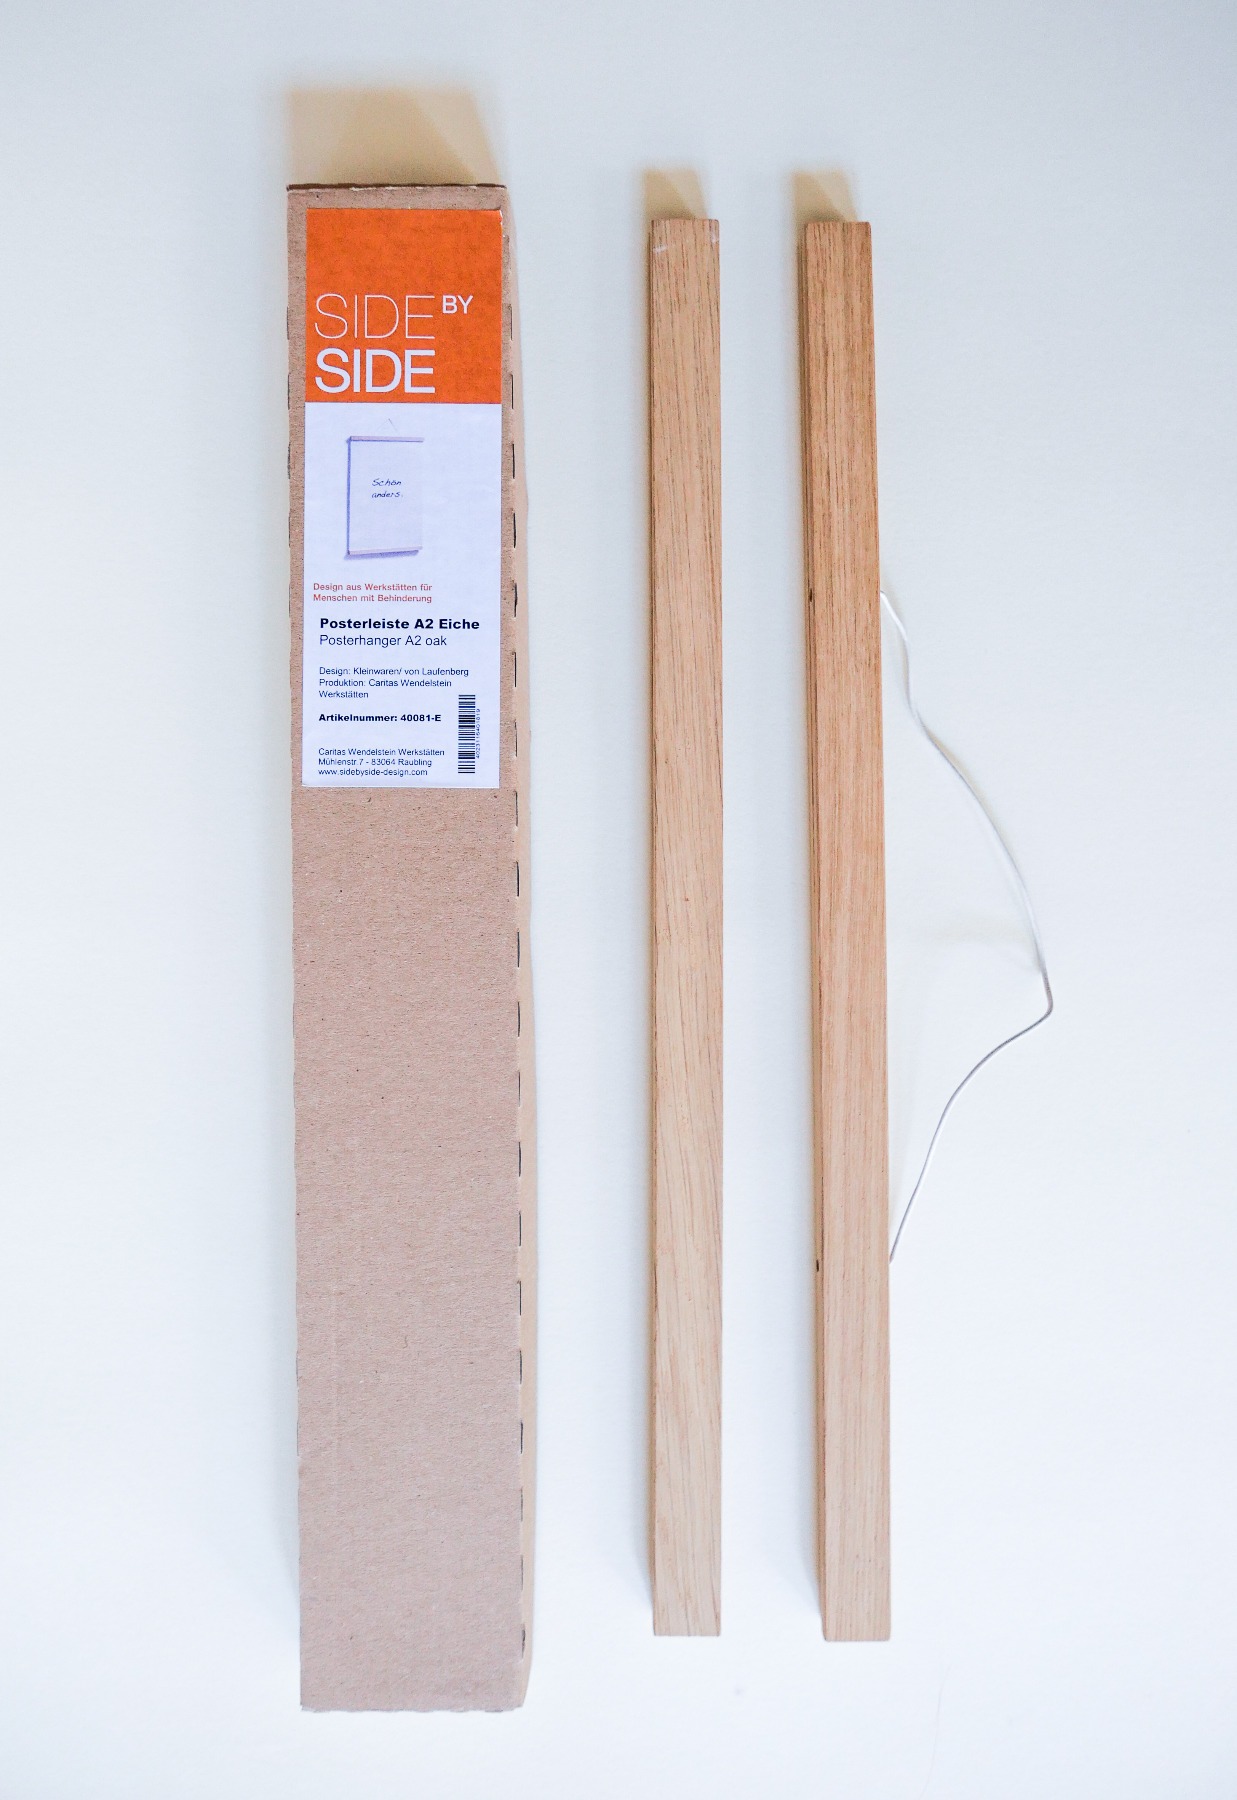 side by side, Posterleiste A2 , magnetische Posterleiste aus Holz 3